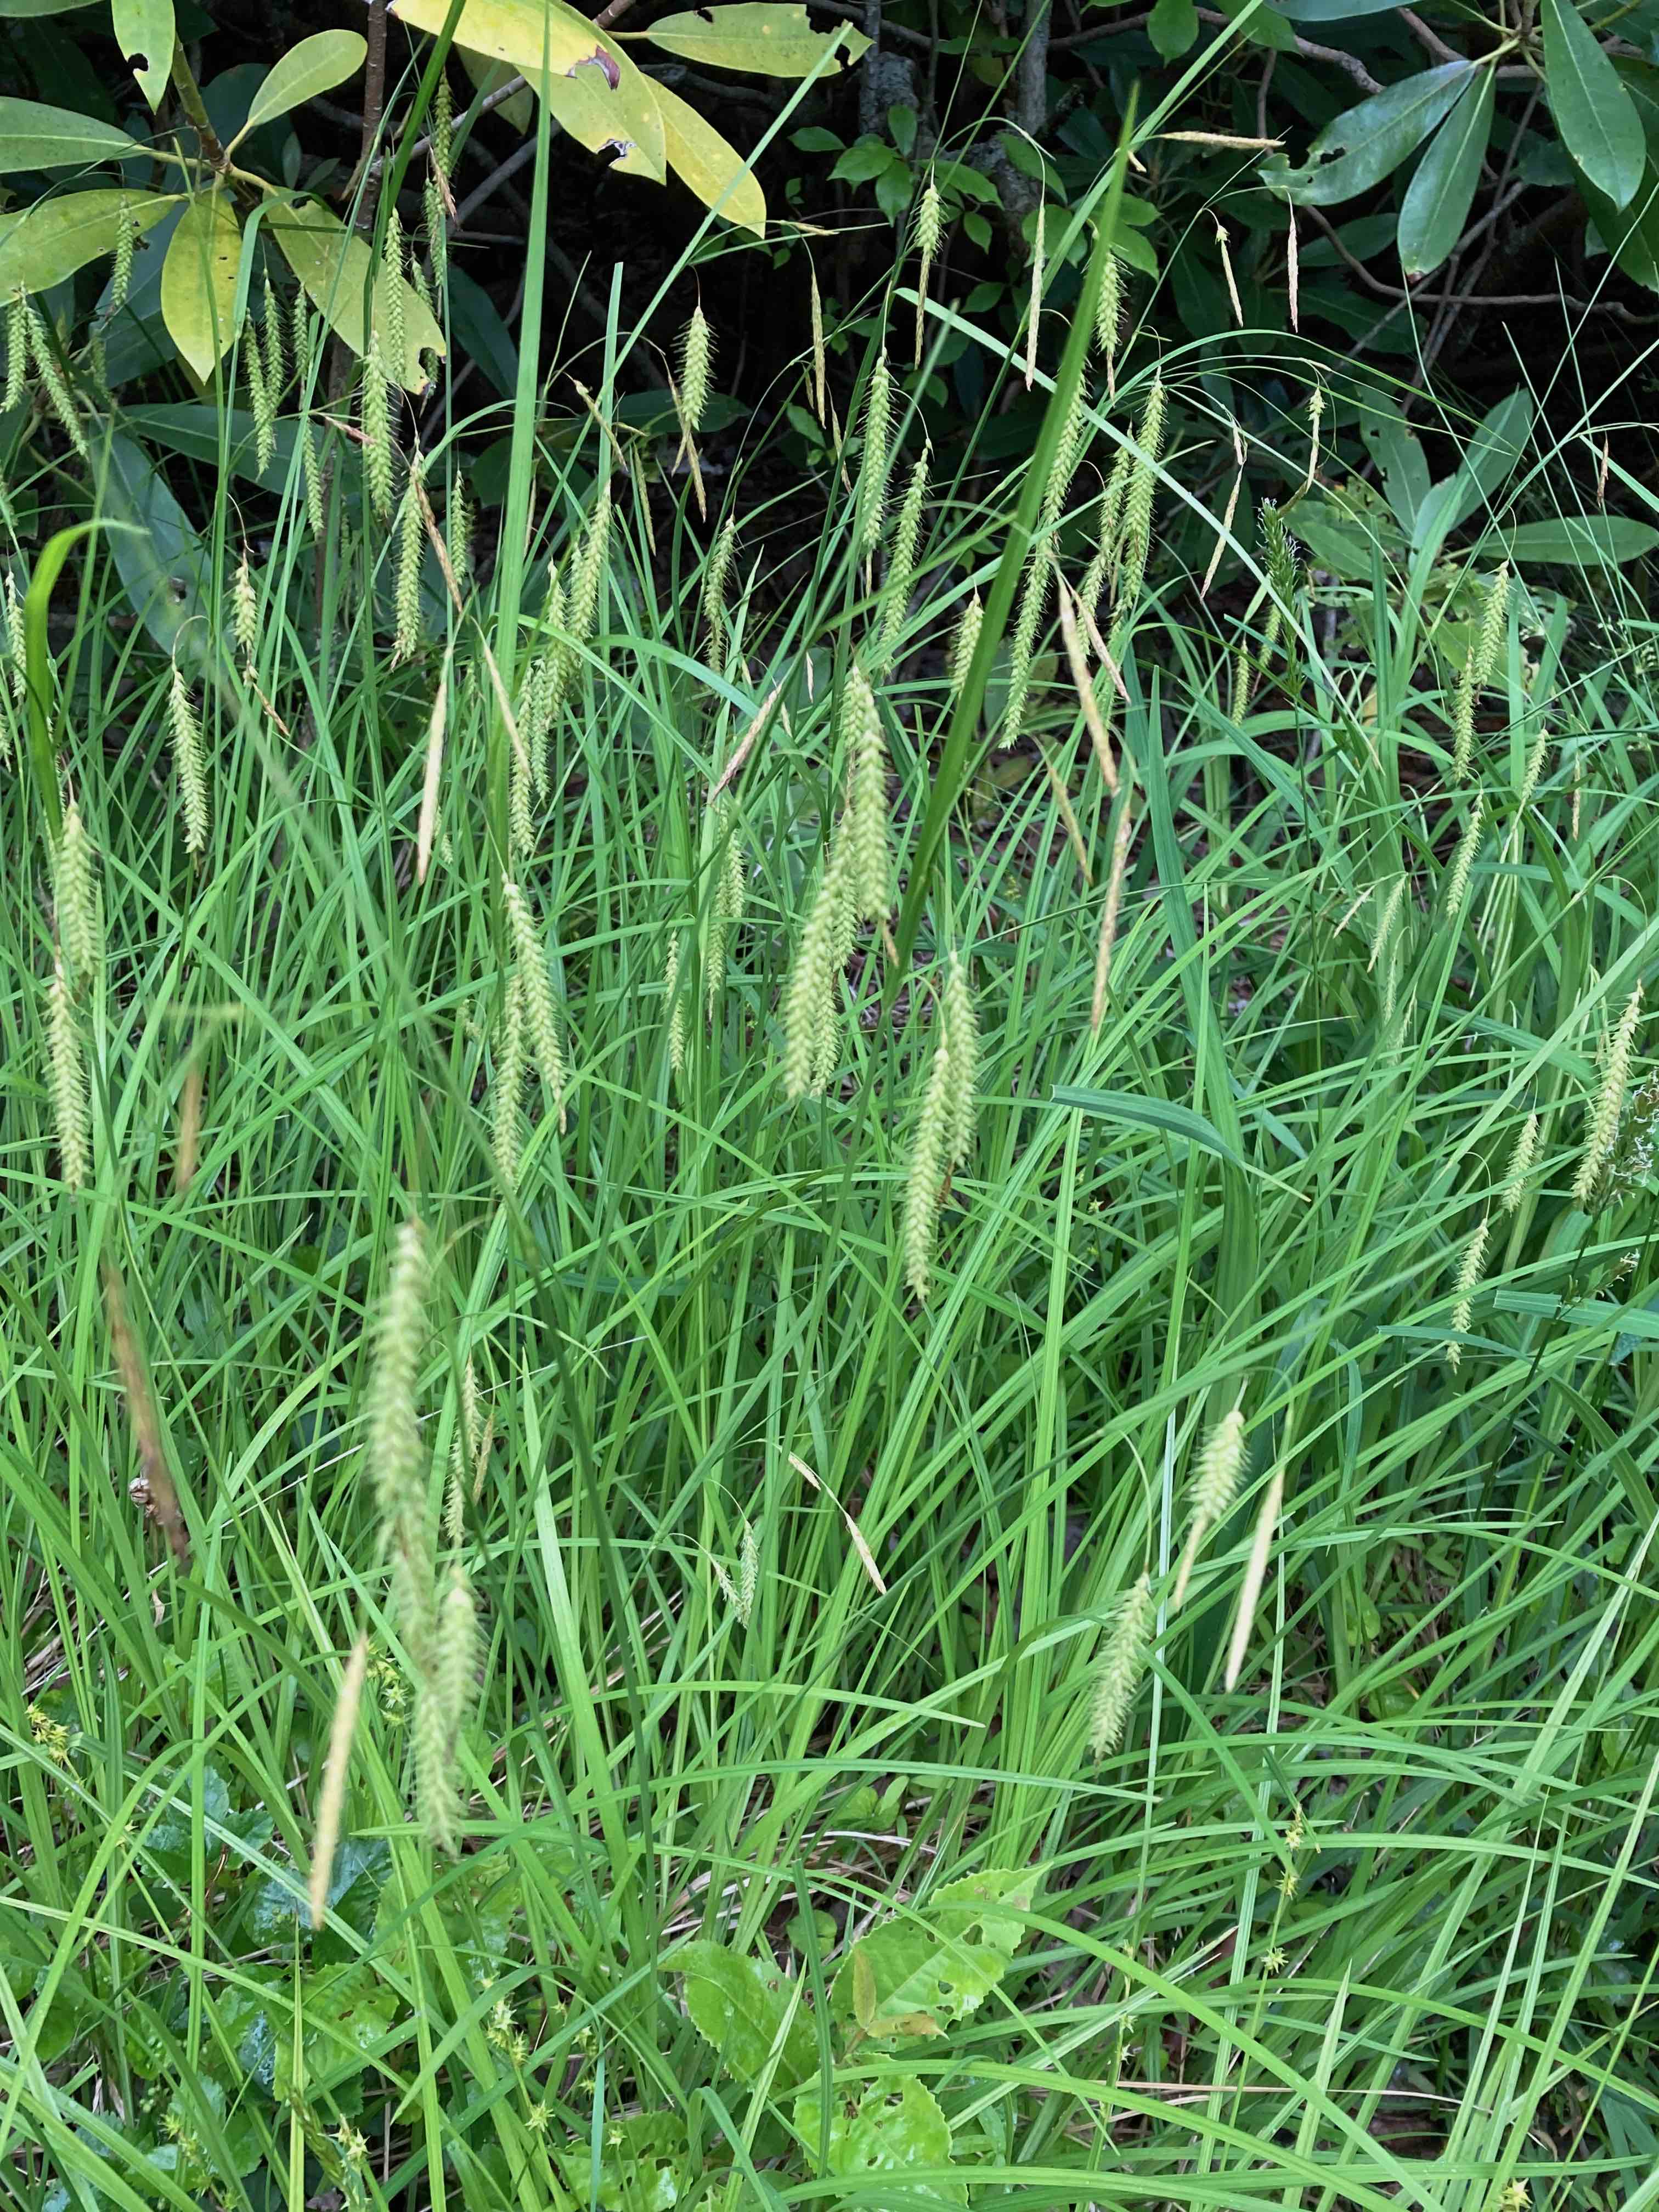 The Scientific Name is Carex crinita. You will likely hear them called Fringed Sedge. This picture shows the A vigorous evergreen sedge that grows in dense clumps with drooping fringe-like spikelets.   of Carex crinita